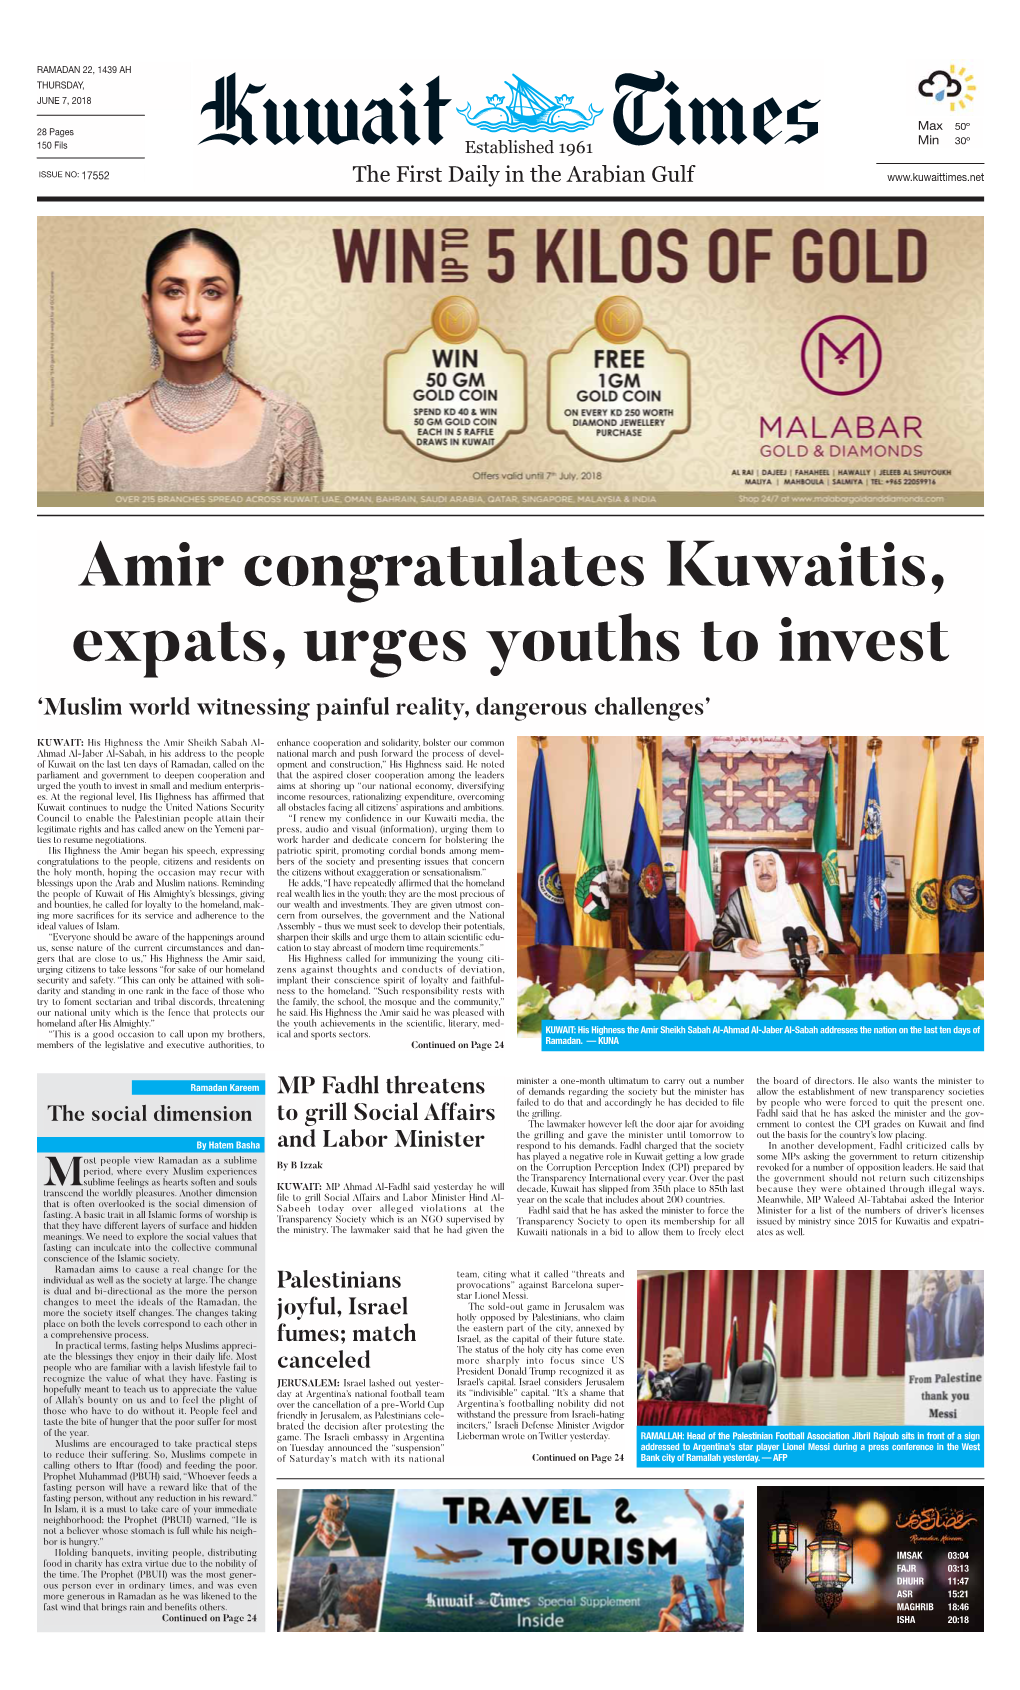 Amir Congratulates Kuwaitis, Expats, Urges Youths to Invest ‘Muslim World Witnessing Painful Reality, Dangerous Challenges’